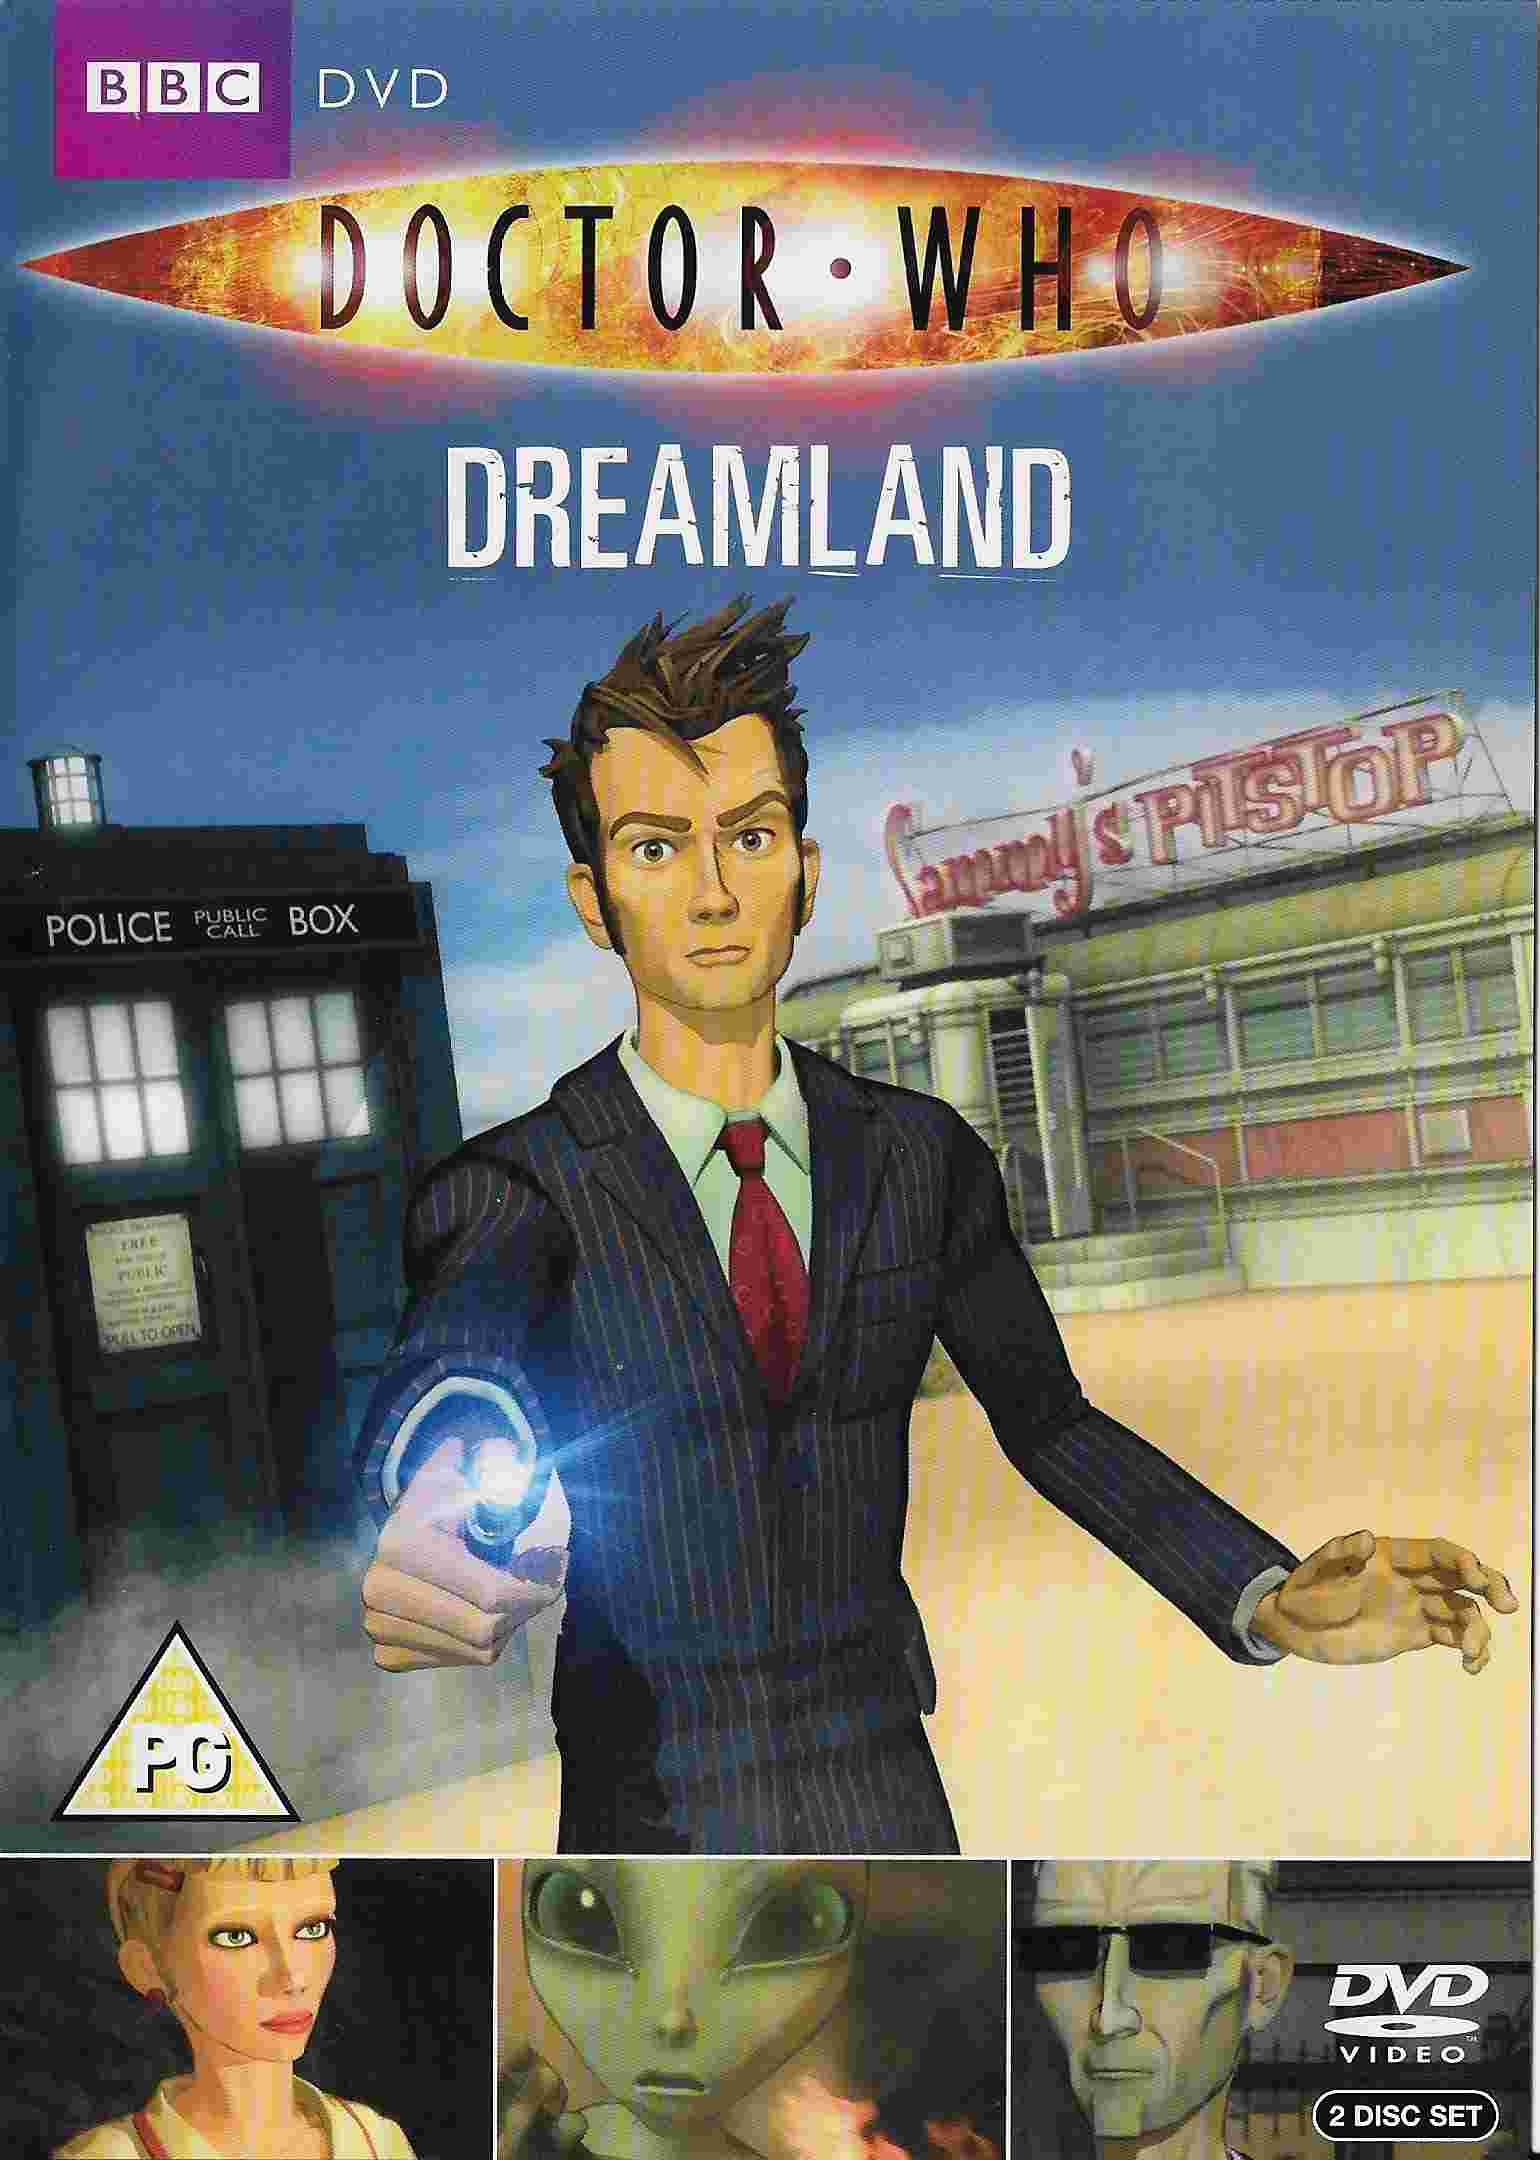 Picture of BBCDVD 3163 Doctor Who - Dreamland by artist Phil Ford from the BBC dvds - Records and Tapes library